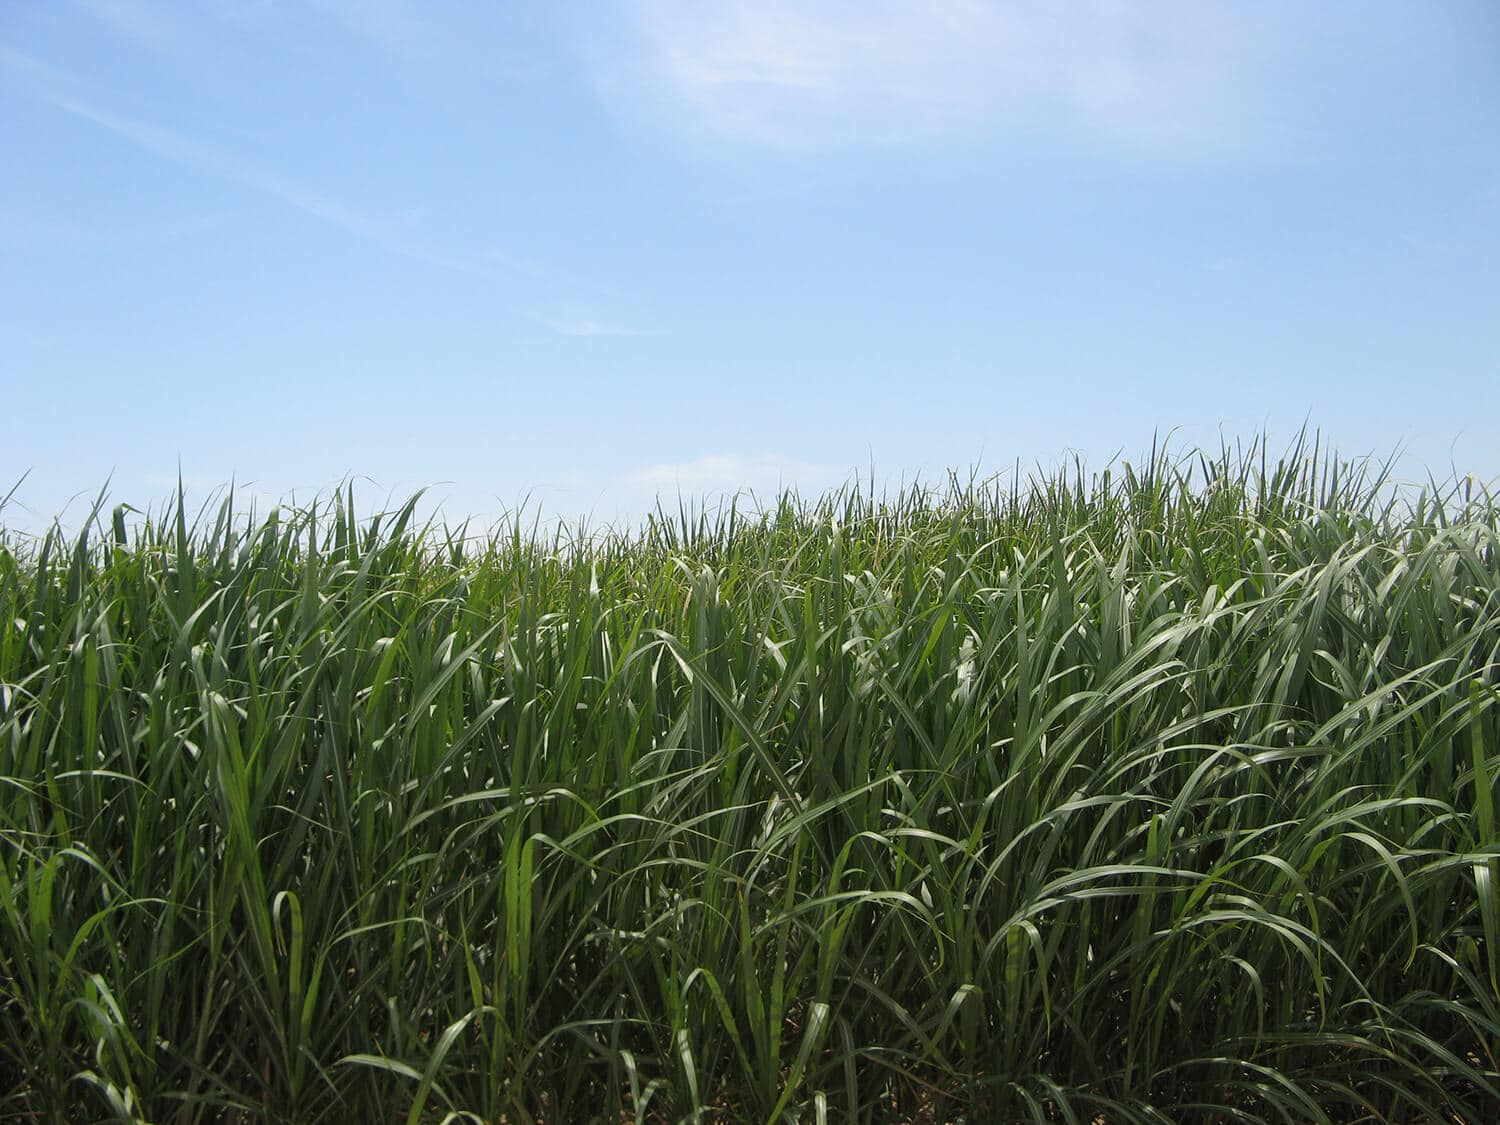 Proven Irrigation Solutions for Sugar Cane